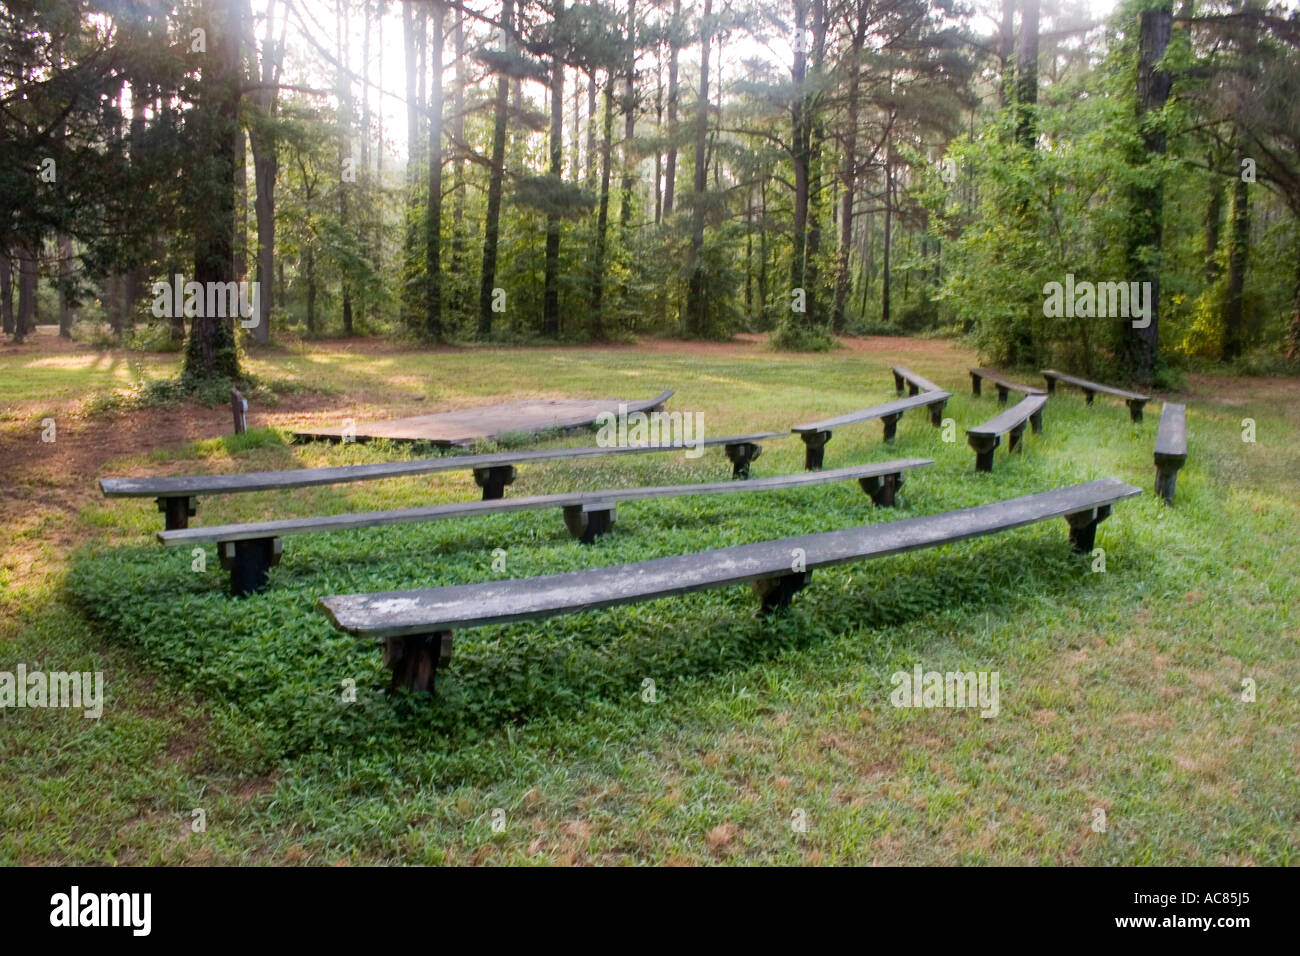 Performance stage in forest, bench benches branch clyde day destination forest grass green greenery growth horizontal leaf leave Stock Photo